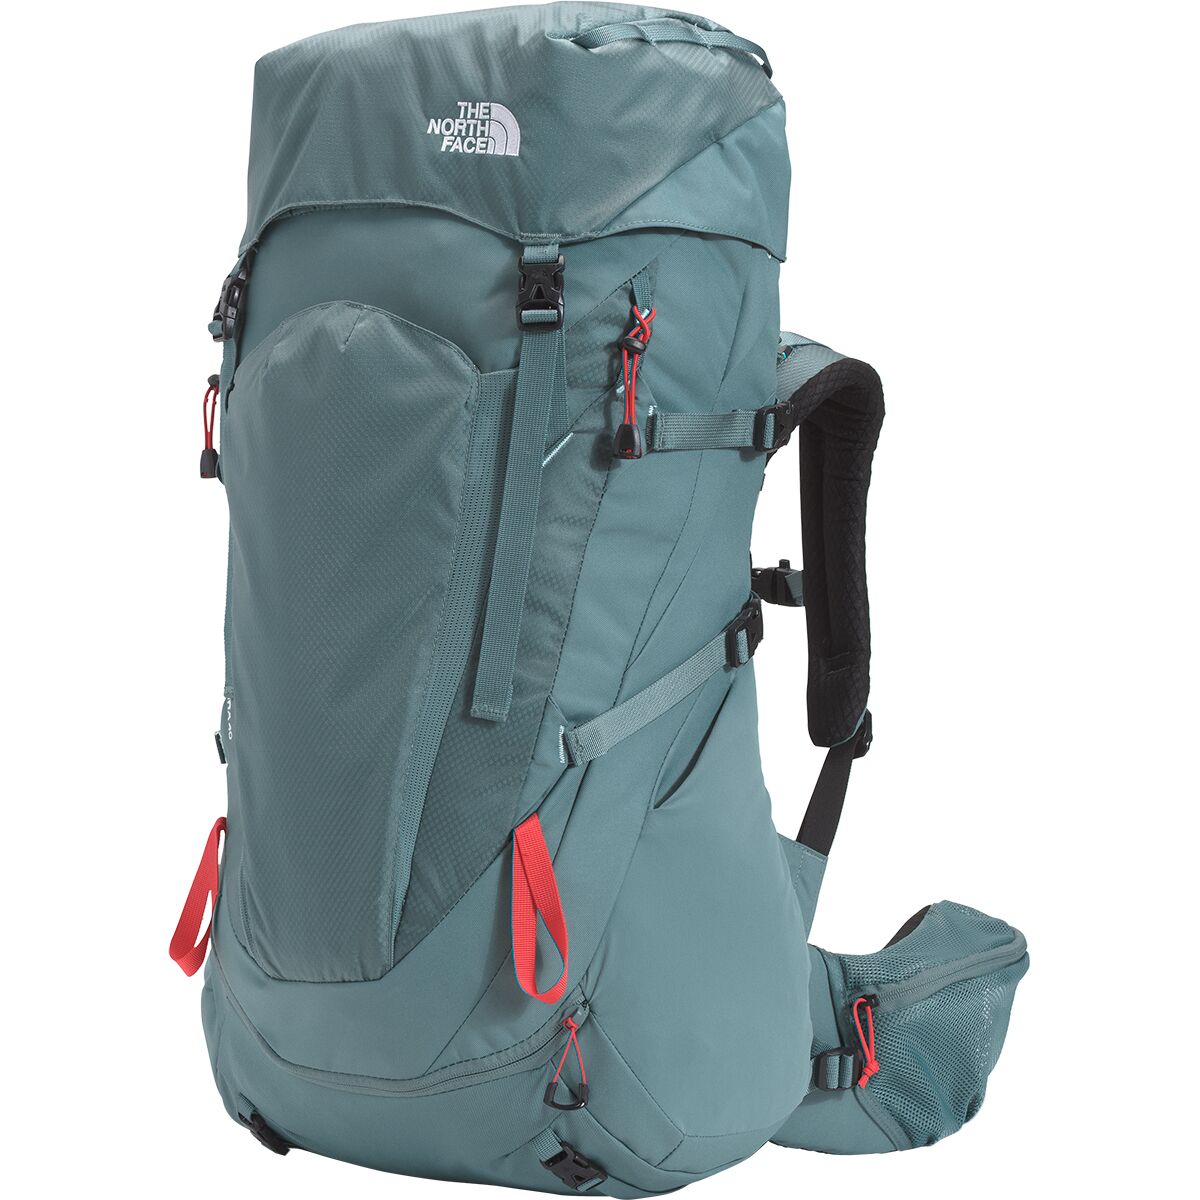 The North Face Terra 40L Backpack - Women's